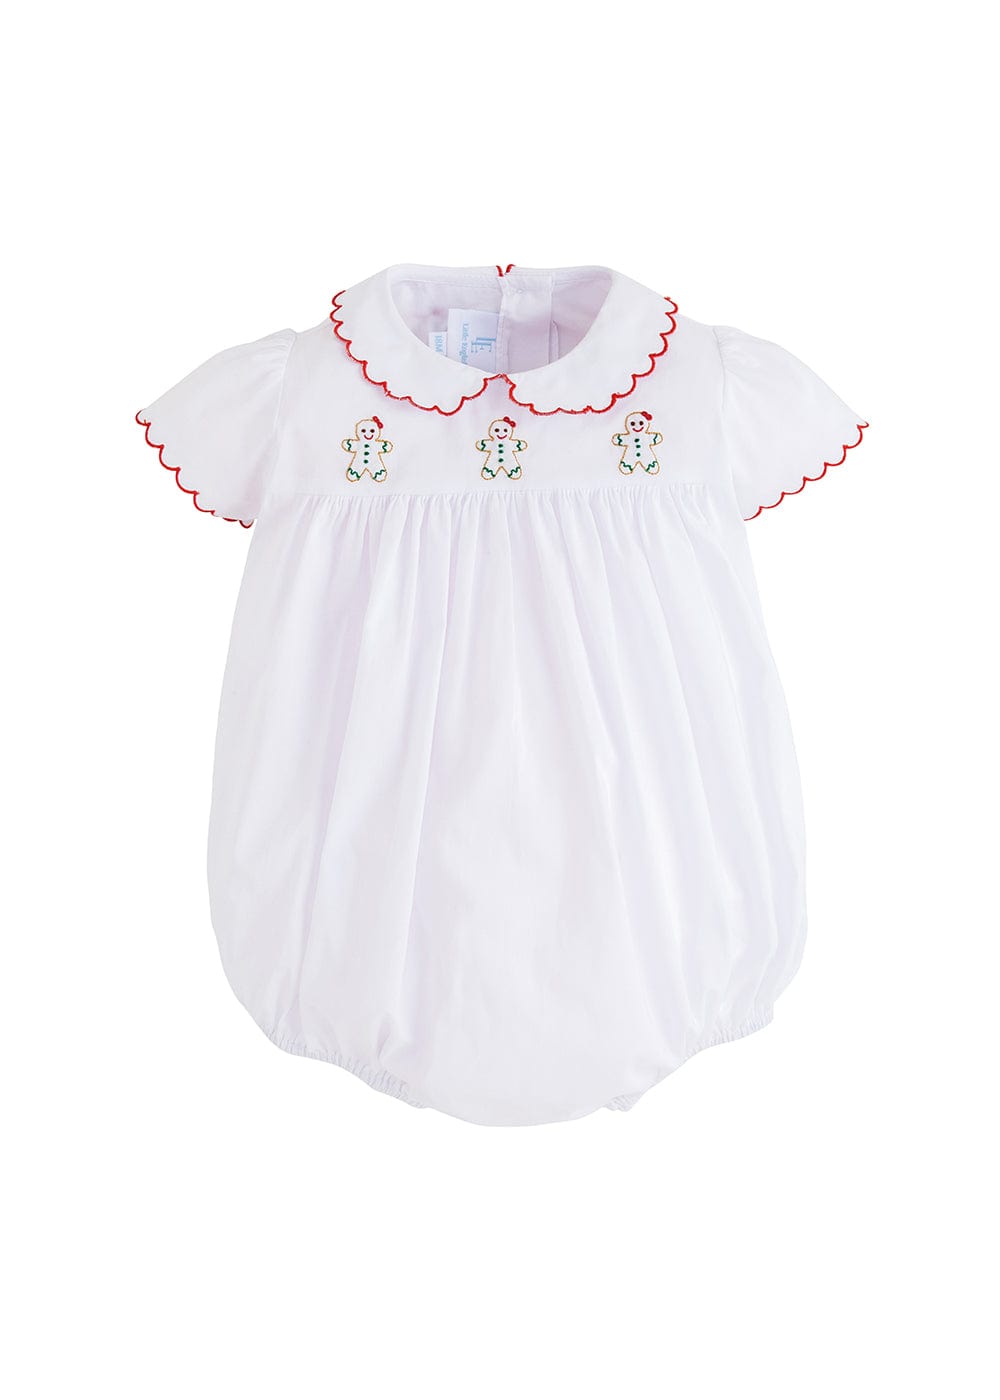 classic childrens clothing girl bubble with embroidered gingerbread men with ruffle peter pan collar